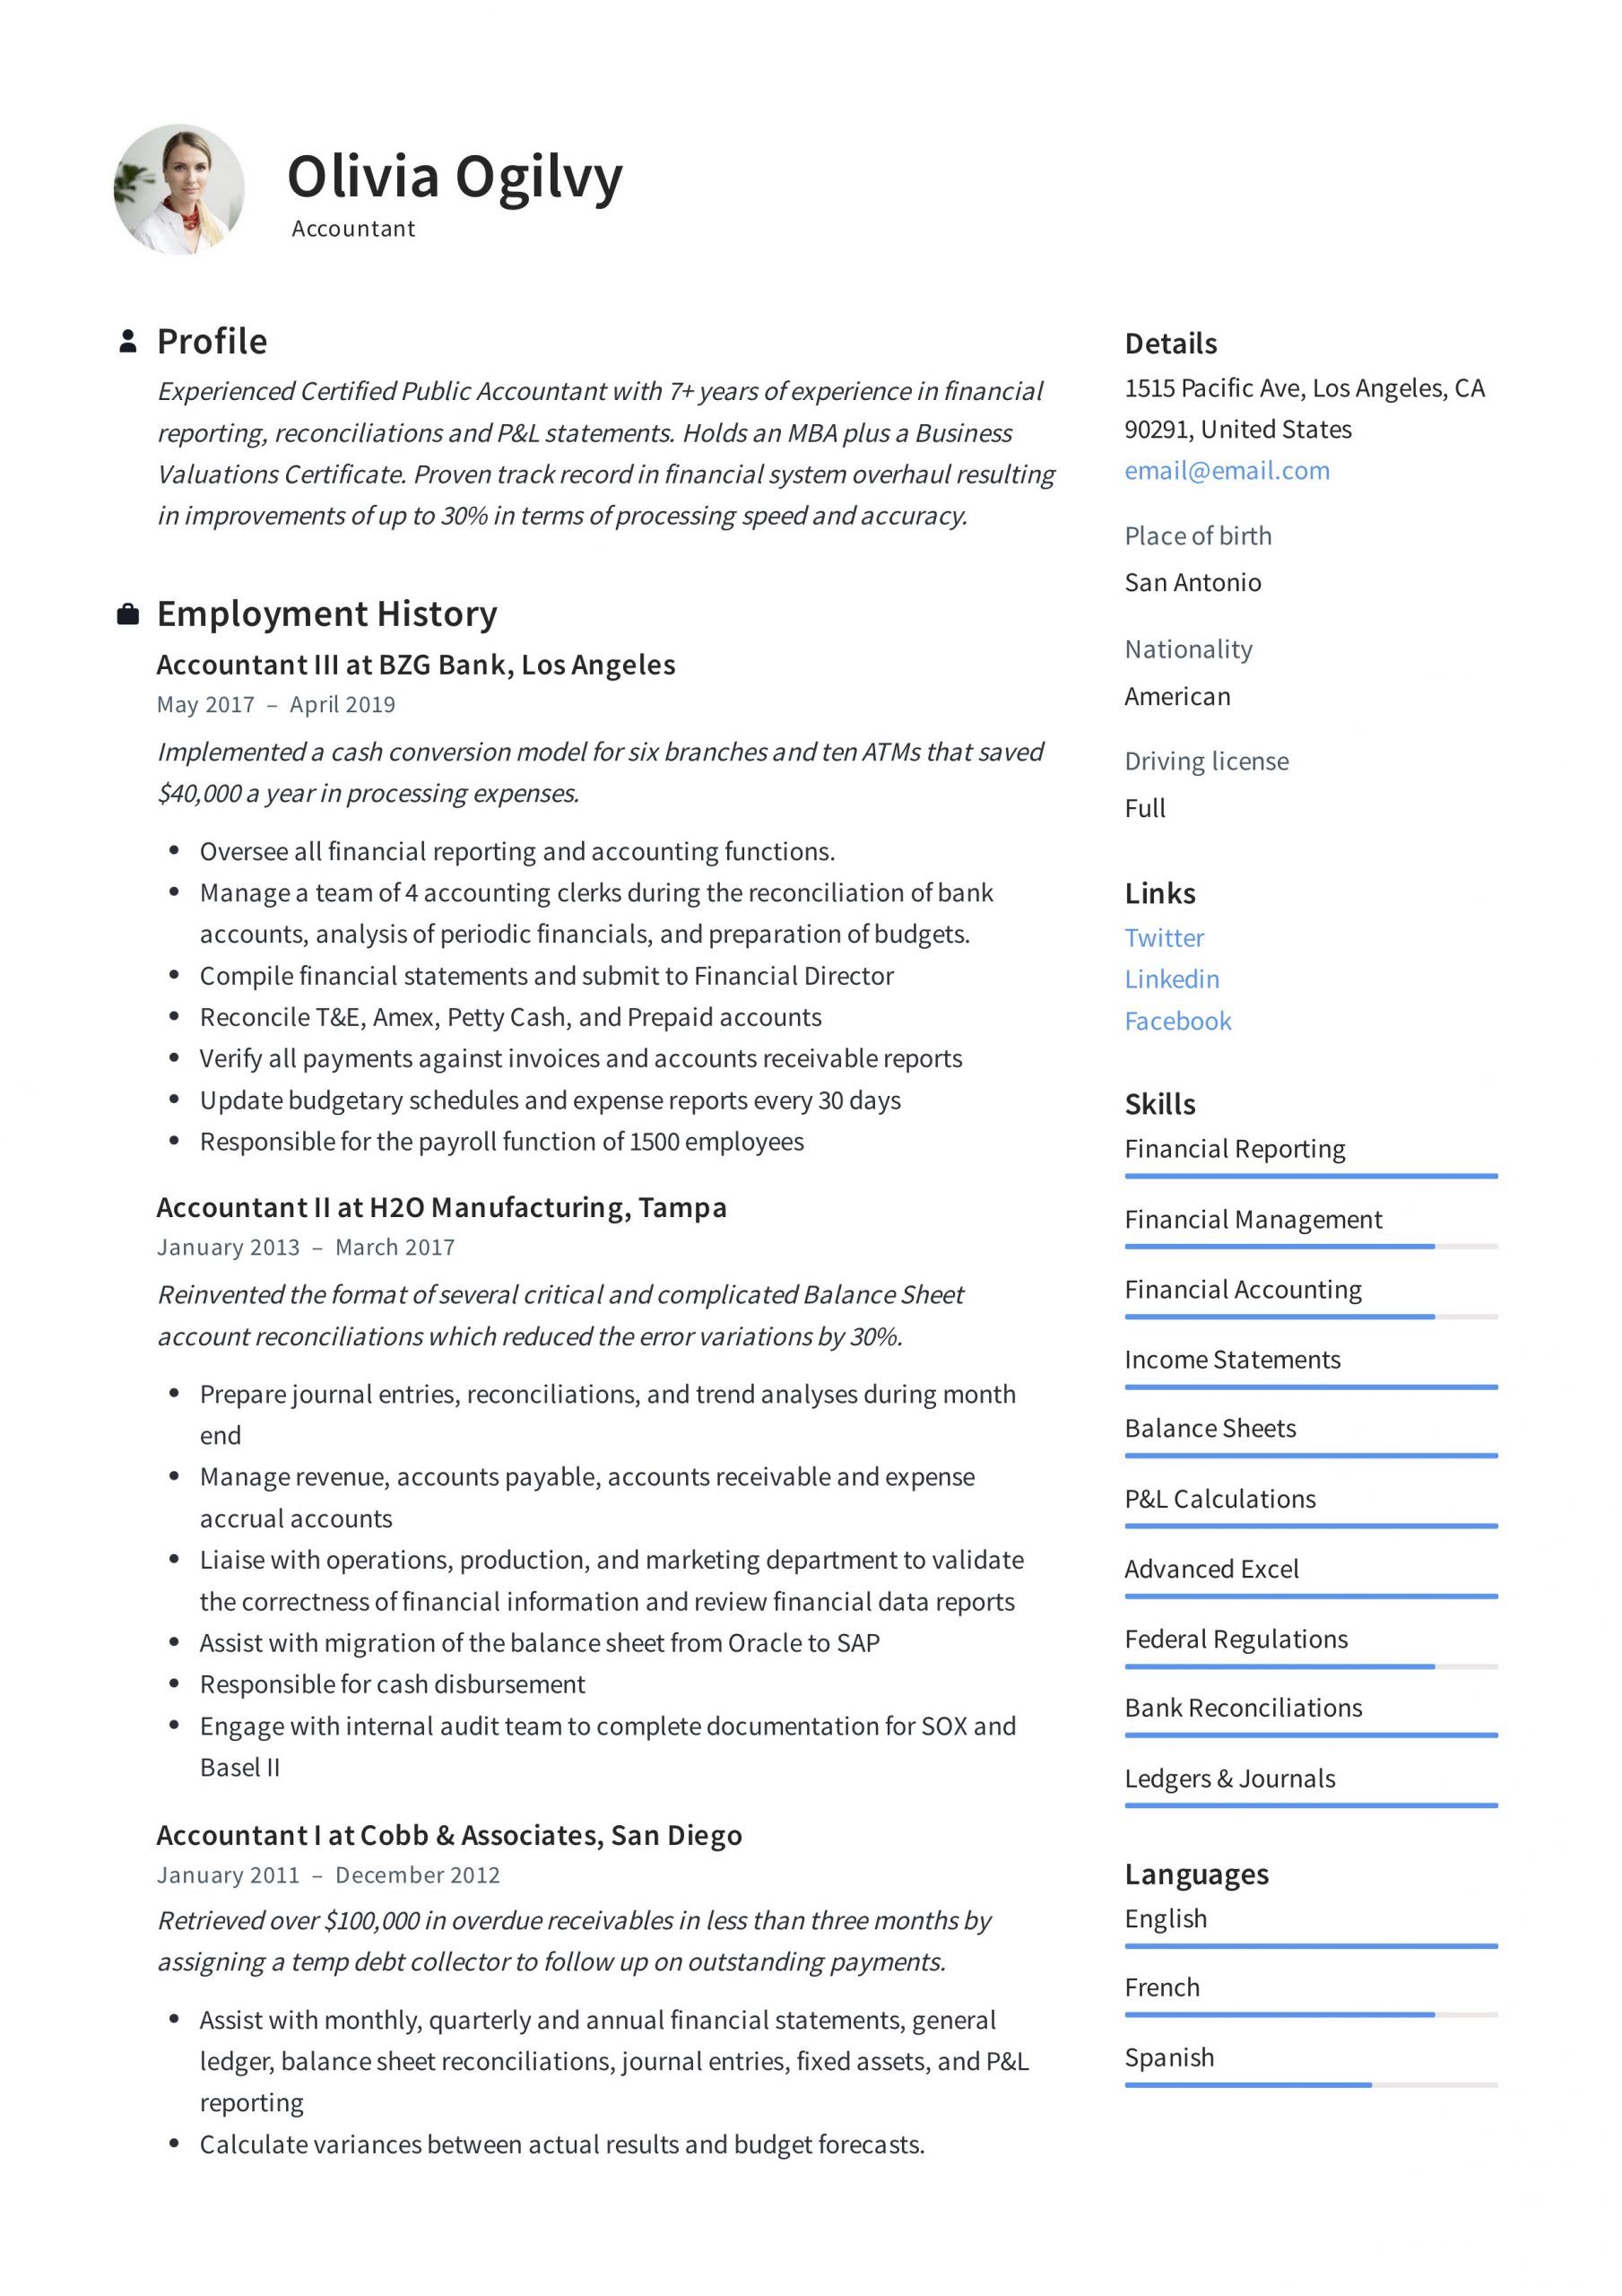 Sample Of Functional Resume for Accountant Accountant Resume & Writing Guide  12 Resume Templates Pdf